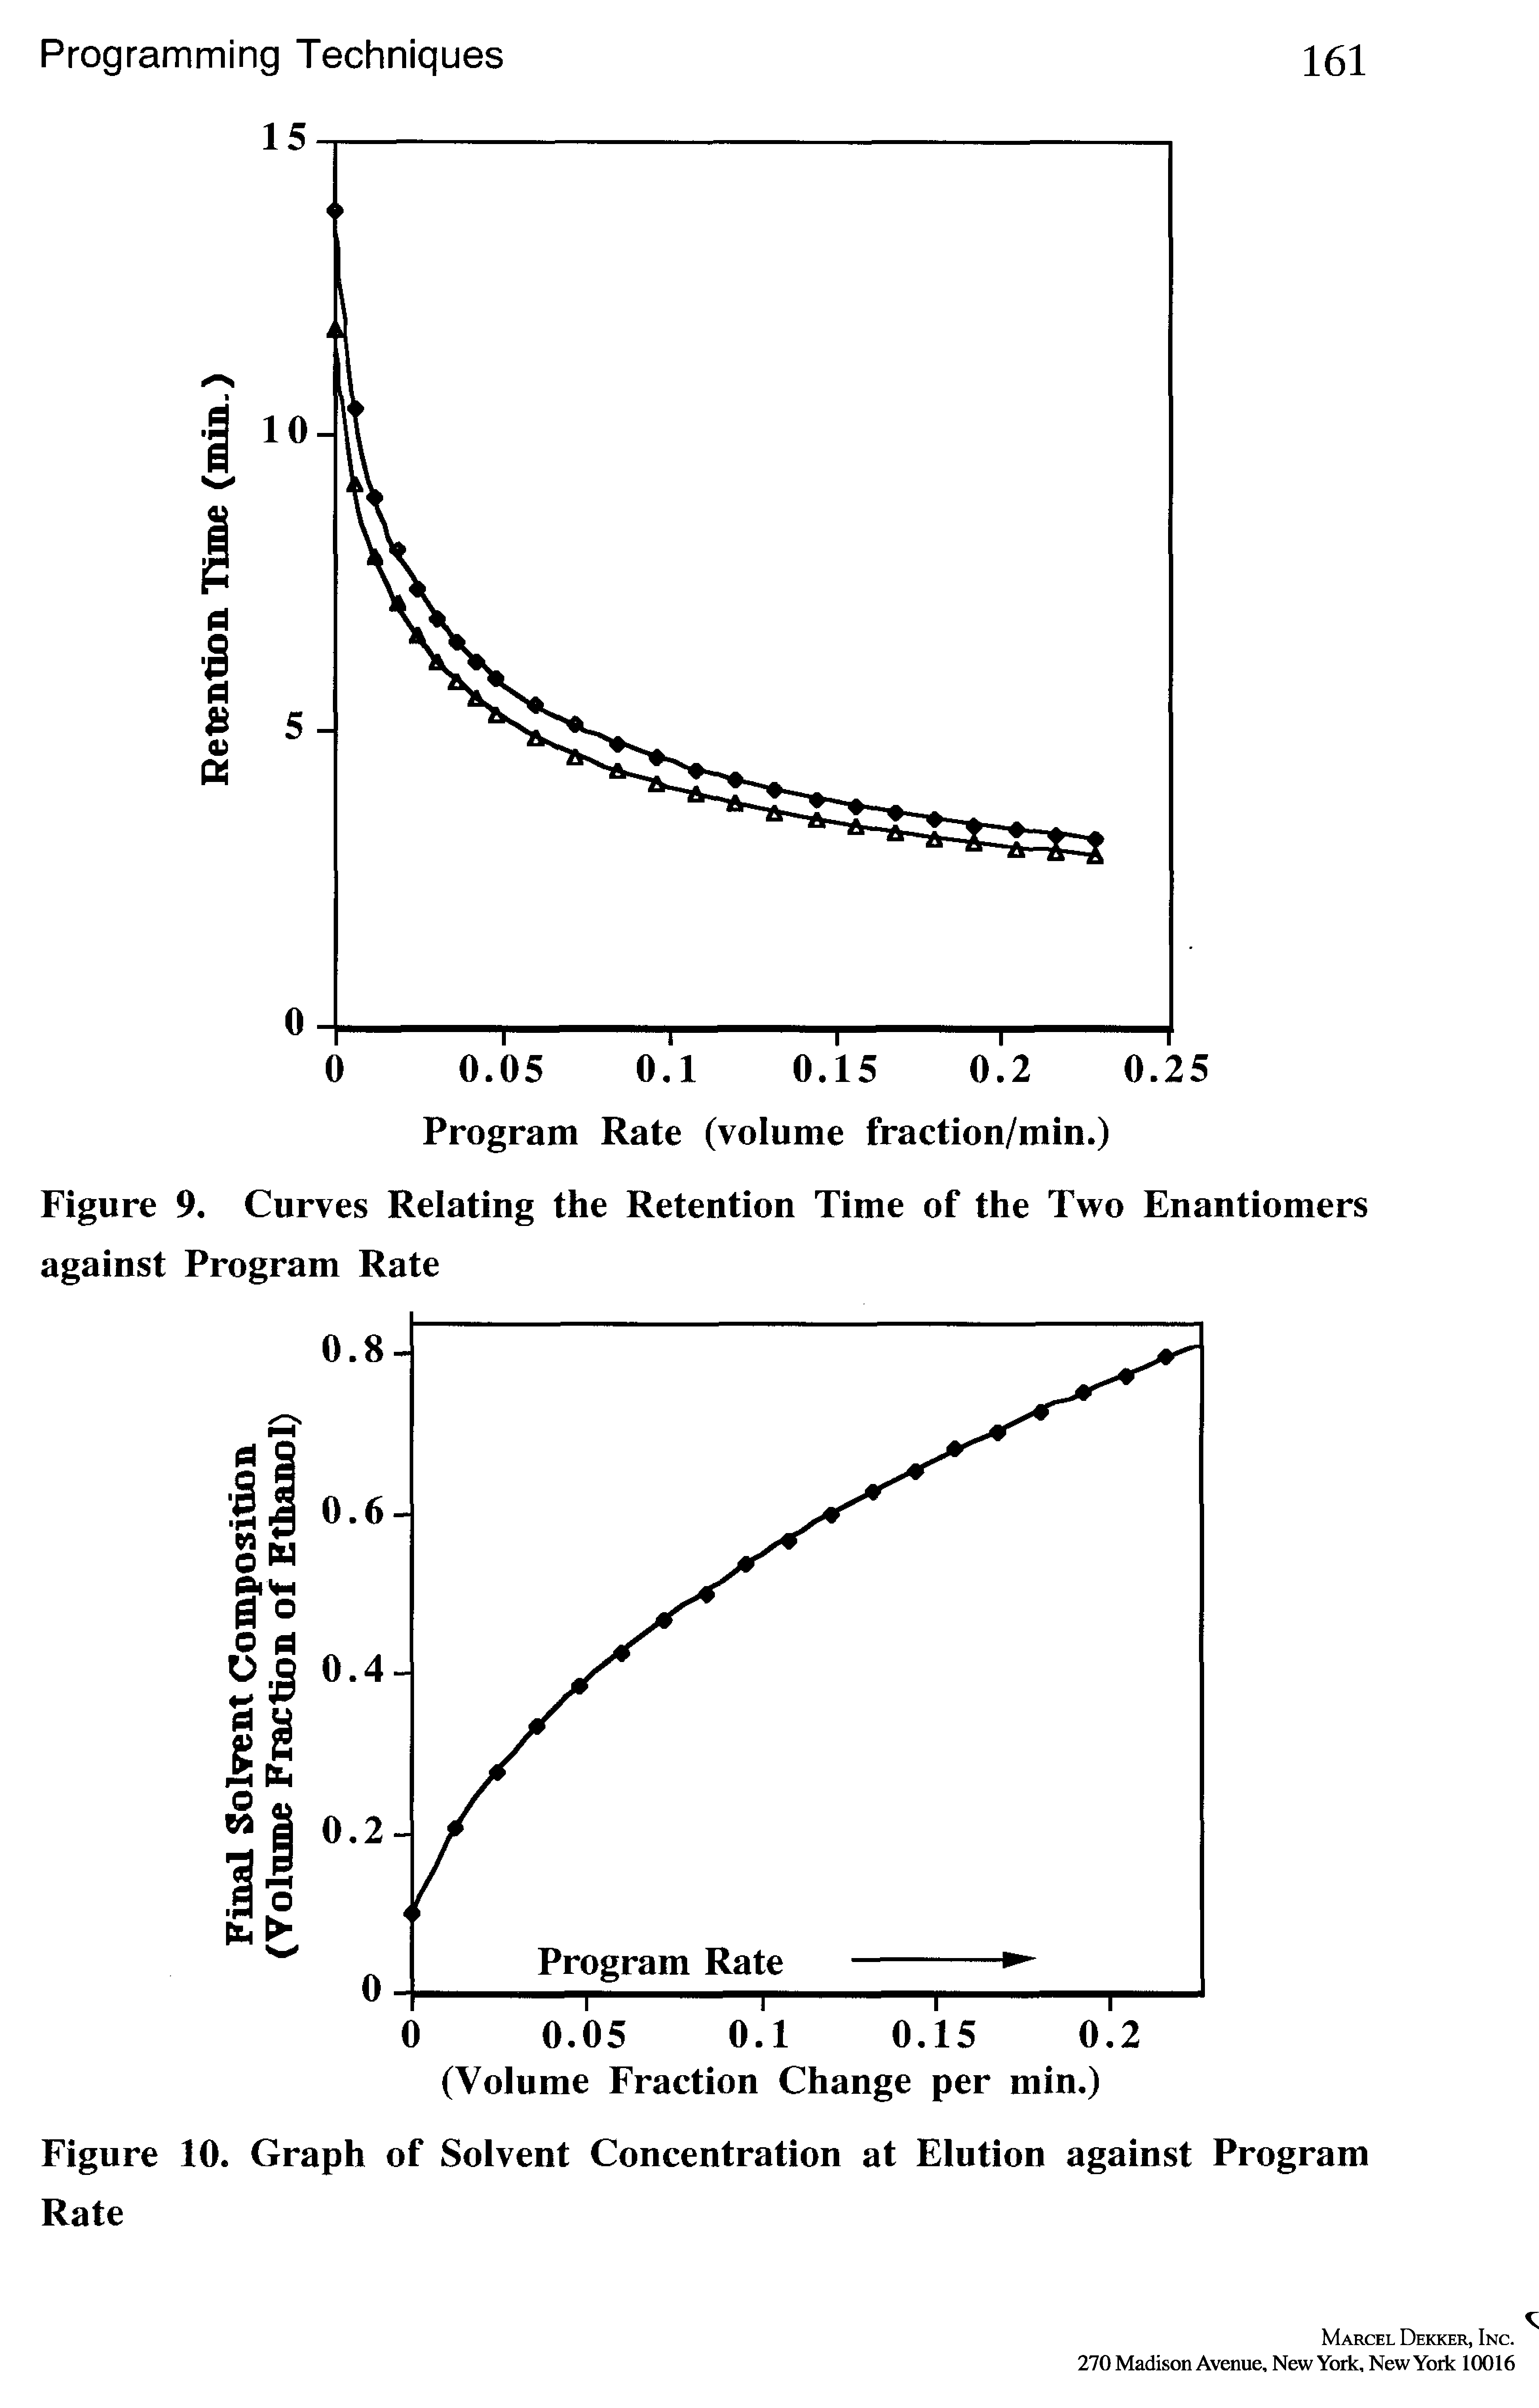 Figure 10. Graph of Solvent Concentration at Elution against Program Rate...